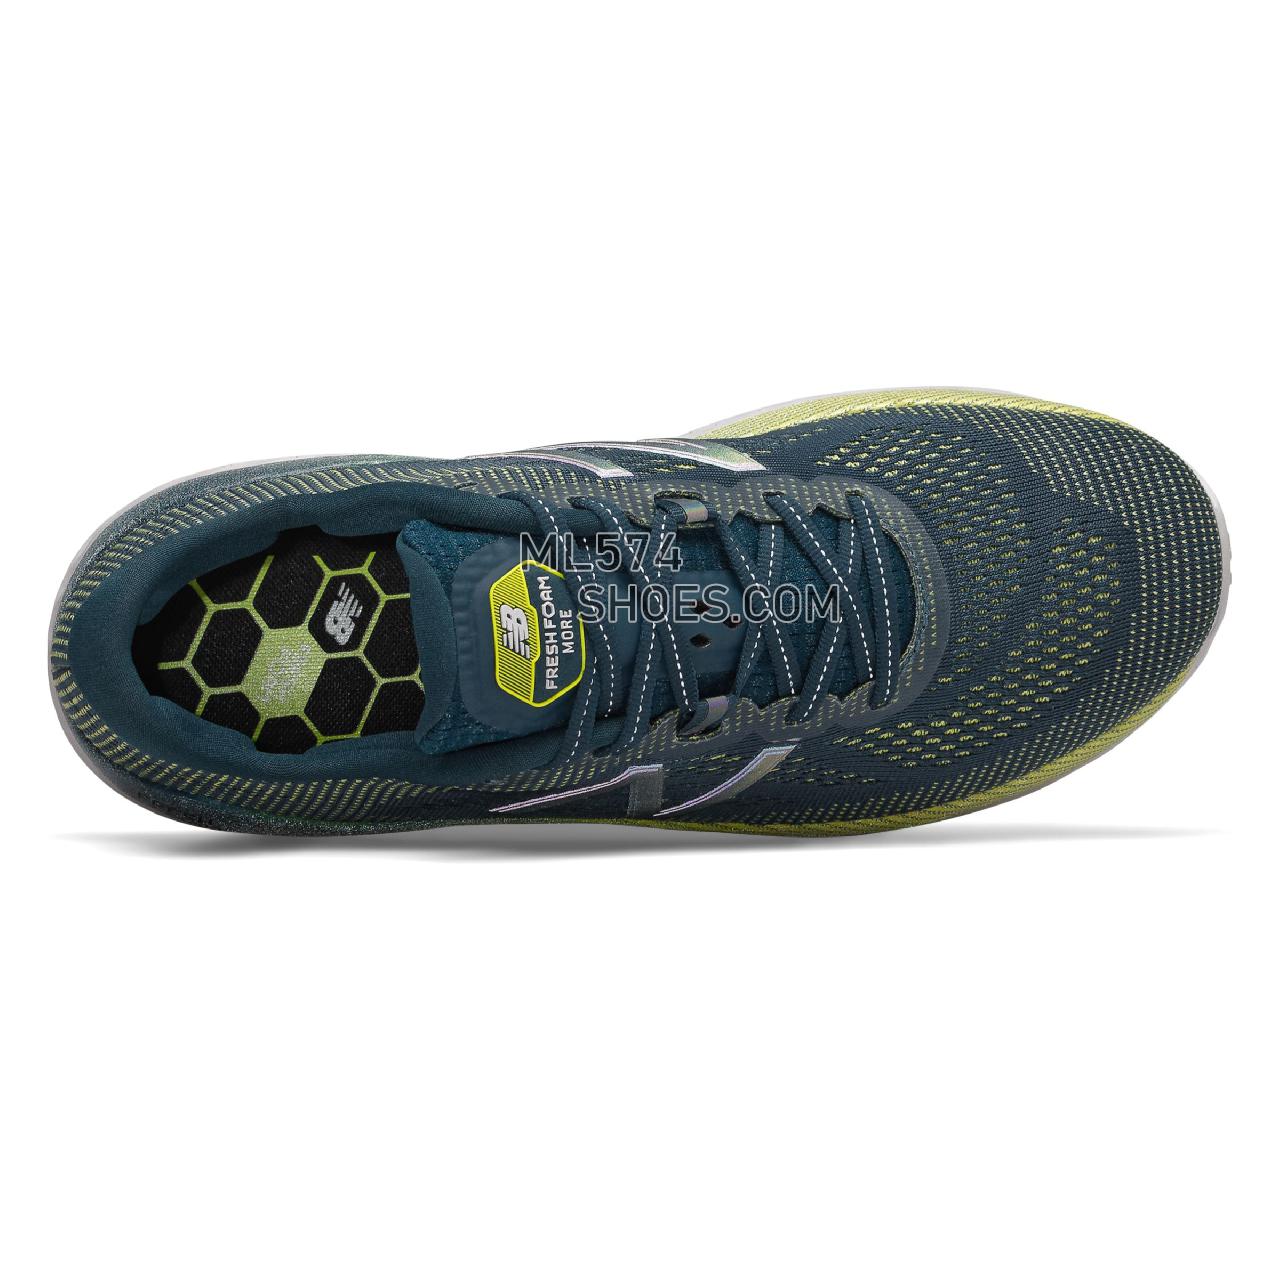 New Balance Fresh Foam More - Men's Neutral Running - Supercell with Orion Blue and Sulphur Yellow - MMORCB